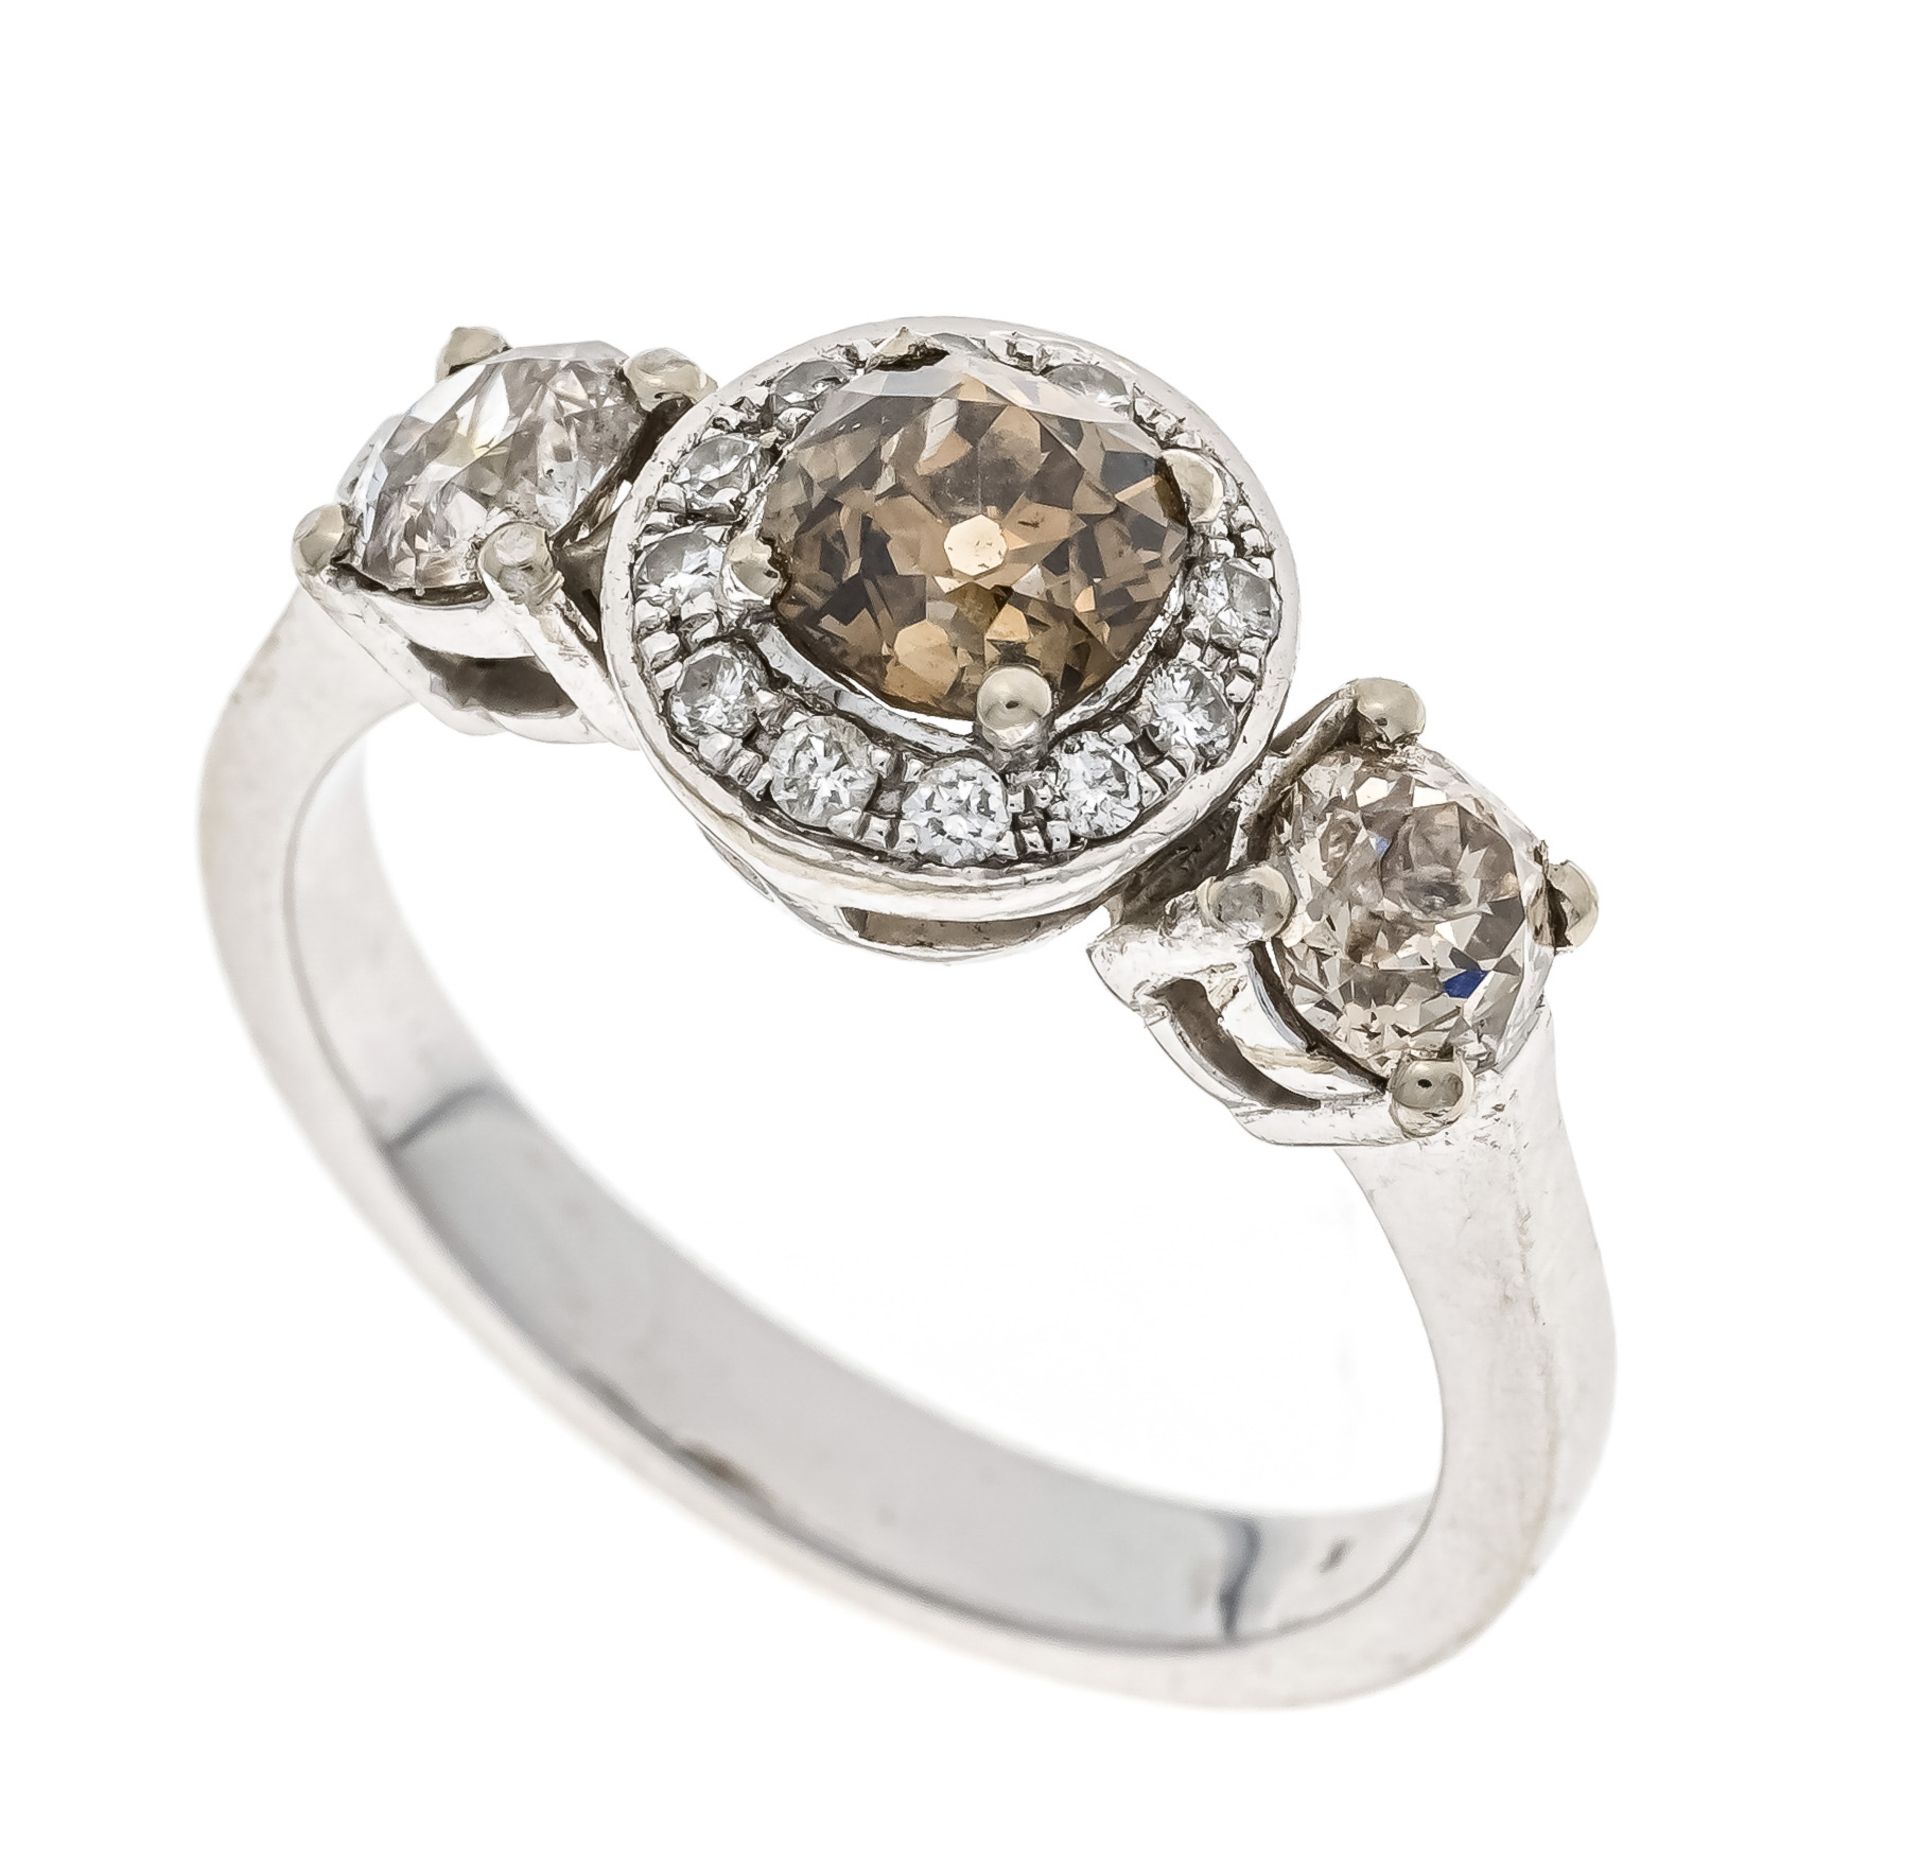 Diamond ring WG 750/000 with one old-cut diamond 0.80 ct fancybrown/SI, 2 old-cut diamonds, totaling